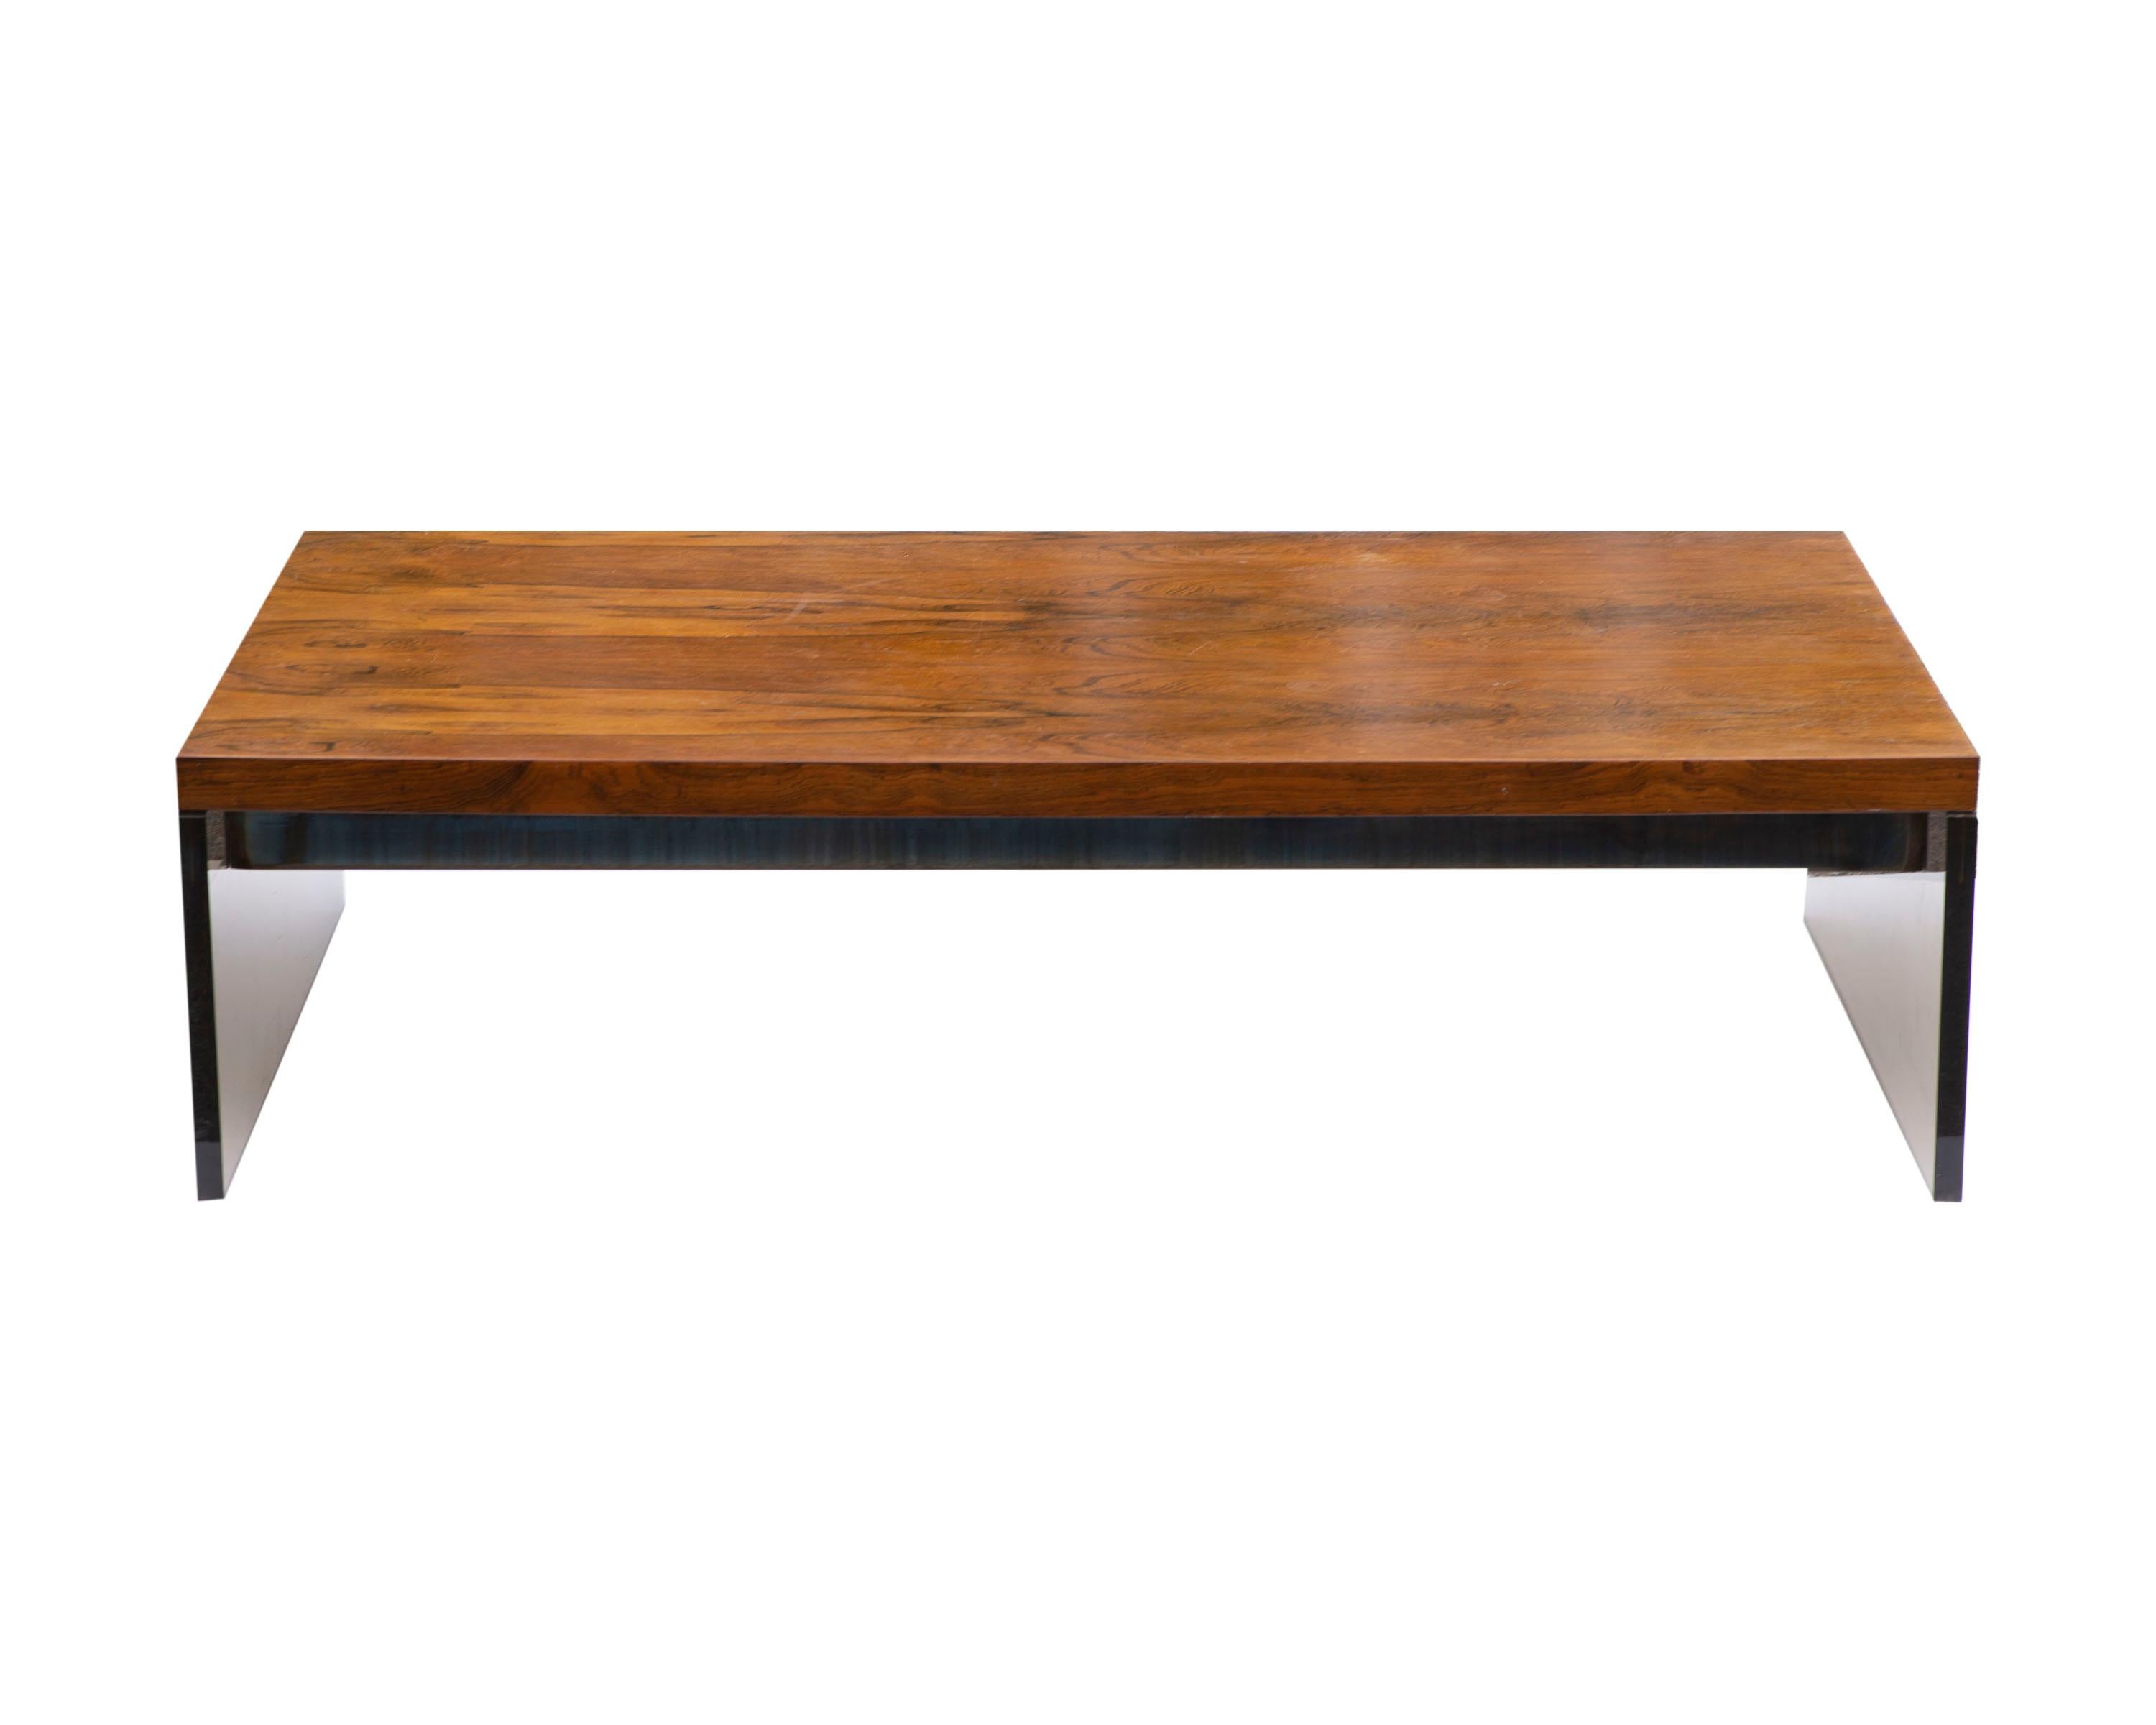 A Mid-Century Modern Environment 70 coffee table designed by Milo Baughman (1923-2003) for Thayer Coggin. The substantial rectangular table features a wood top with a dark stain. Two metal stretchers support the table top. The coffee table rests